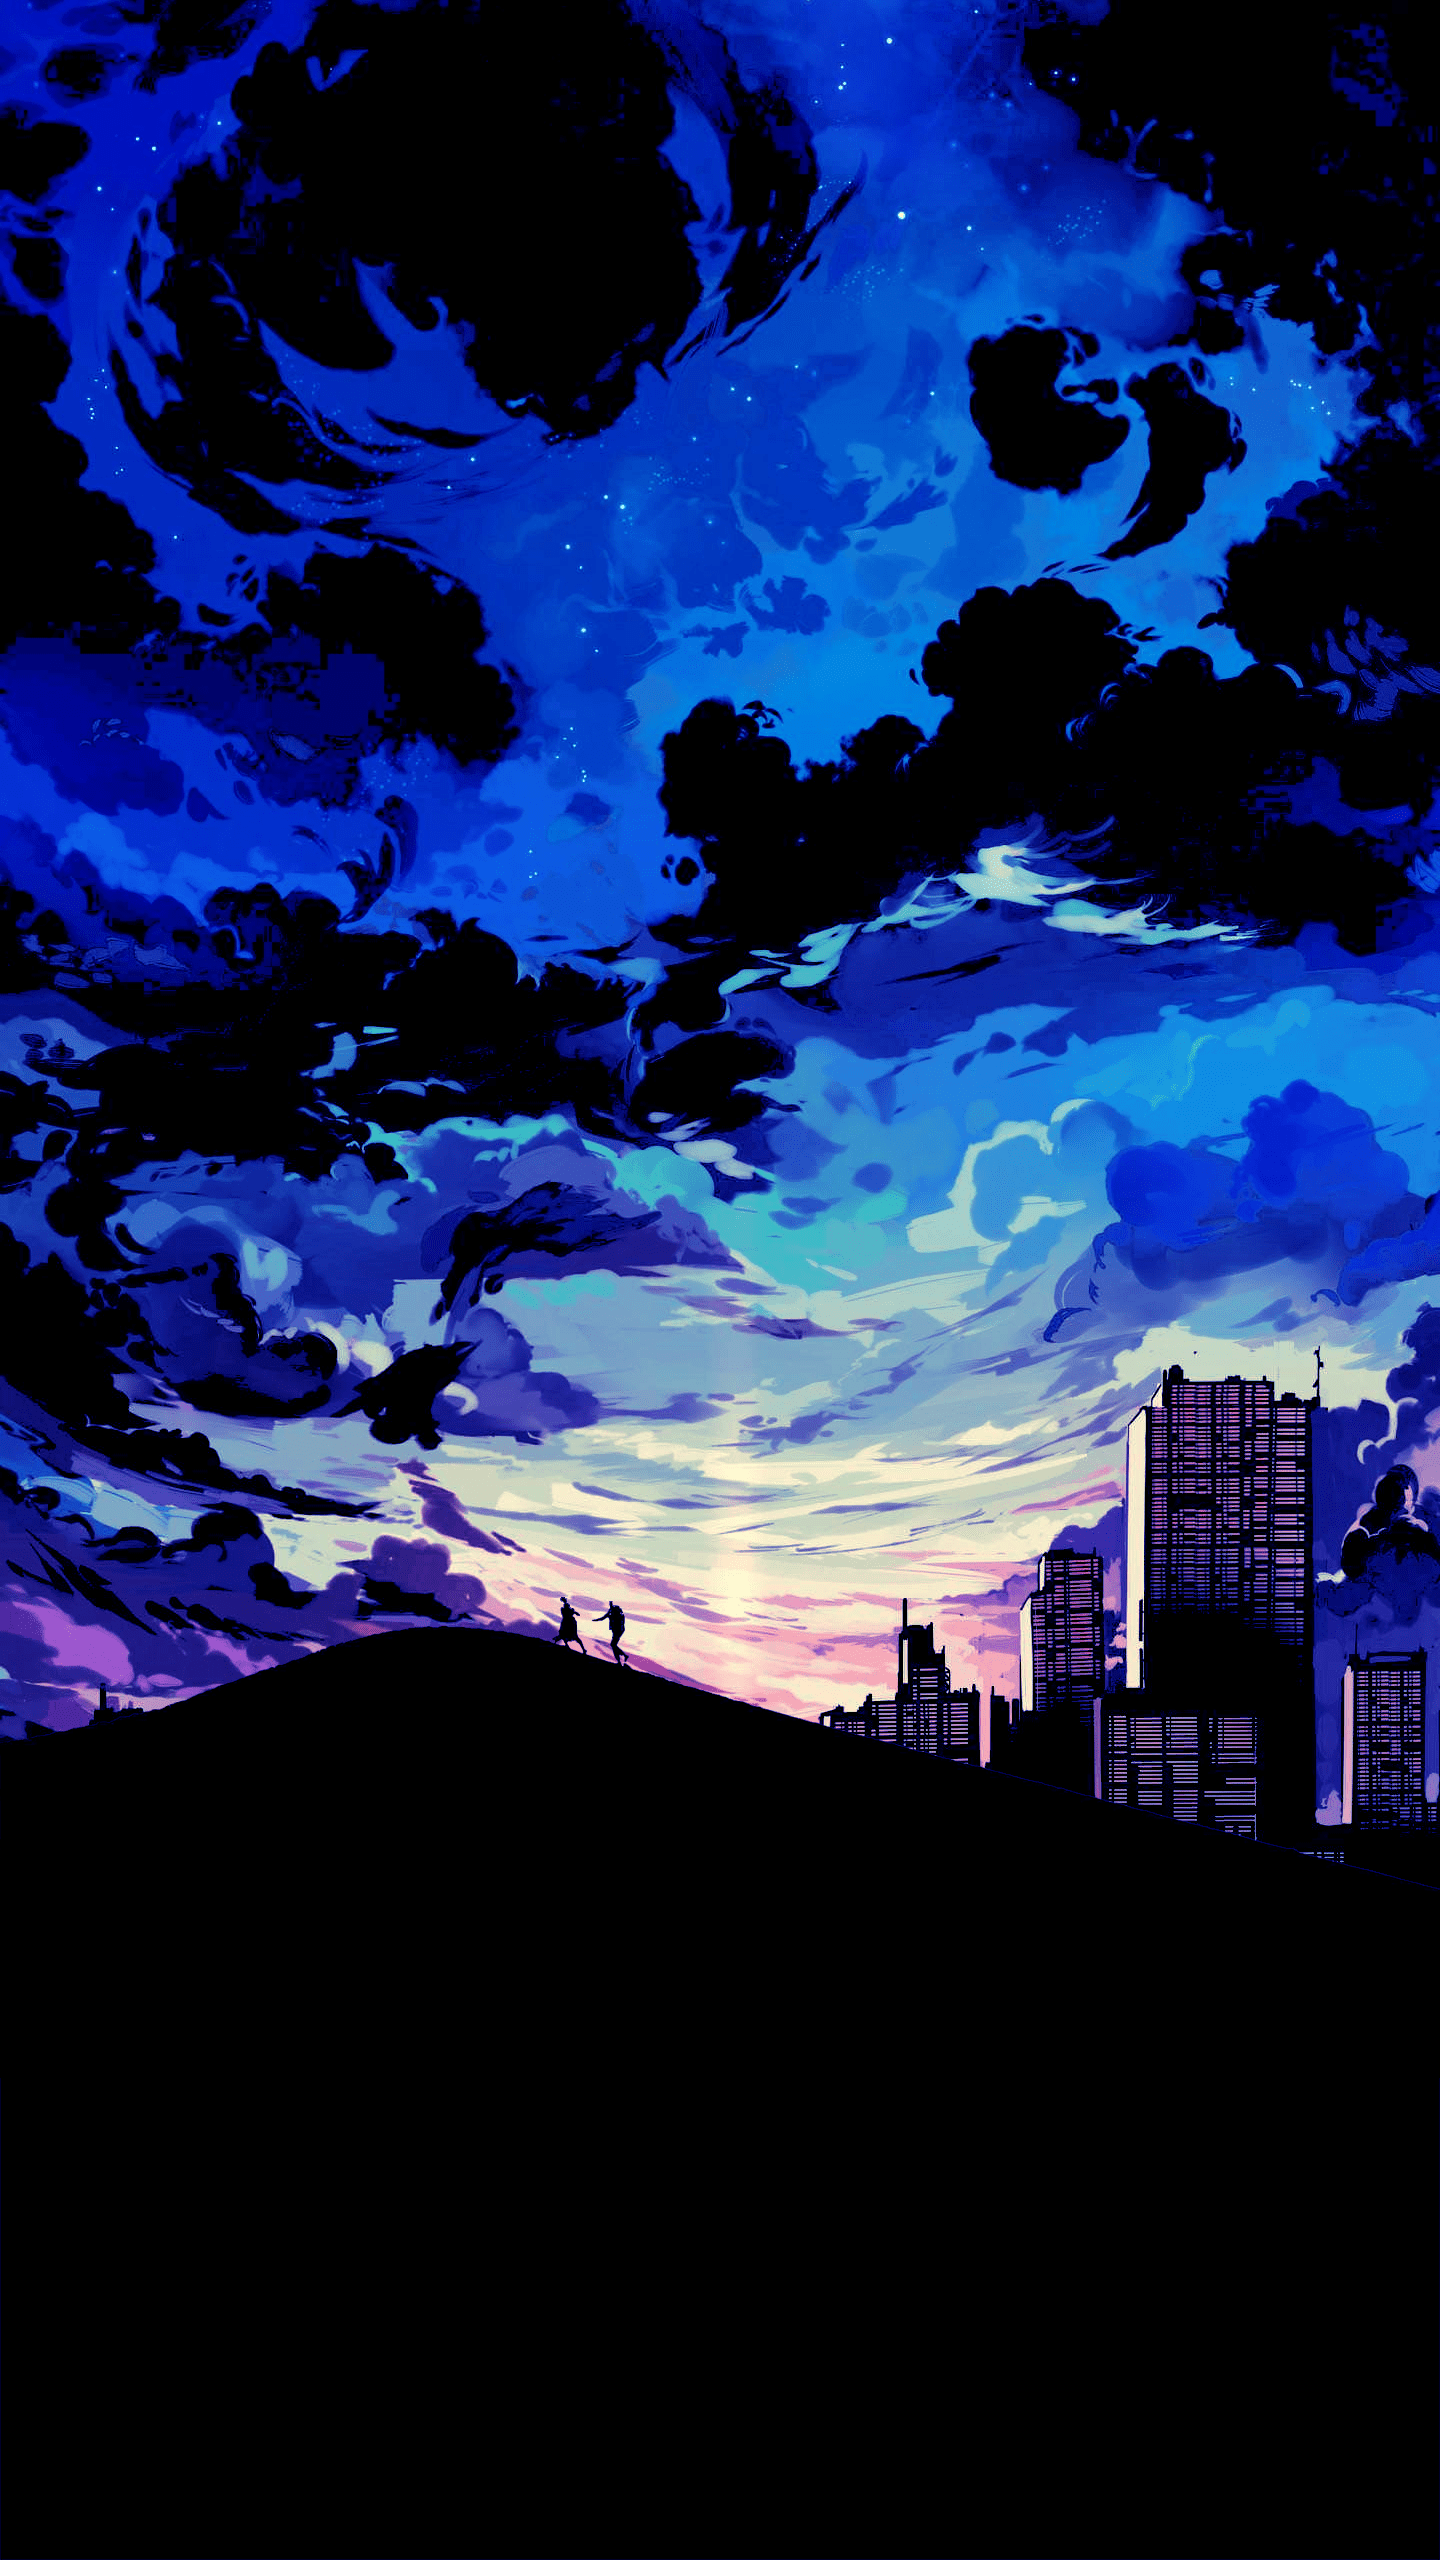 Anime phone wallpaper of a city at night with a sky full of stars - Anime sunset, anime landscape